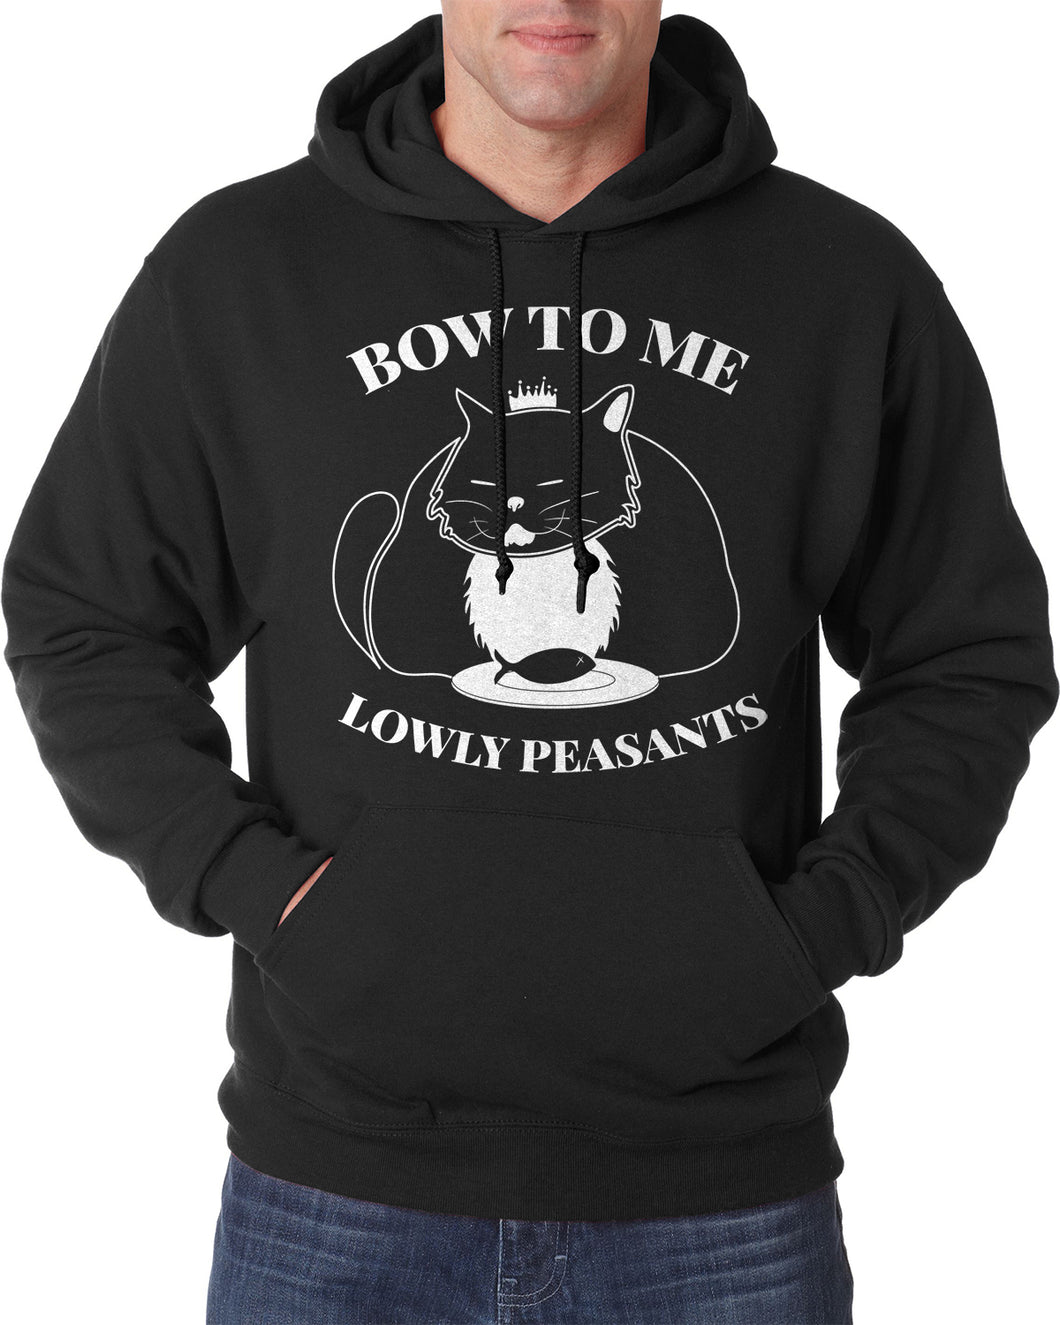 Bow To Me Lowly Peasants Cat Lover Hooded Sweatshirt